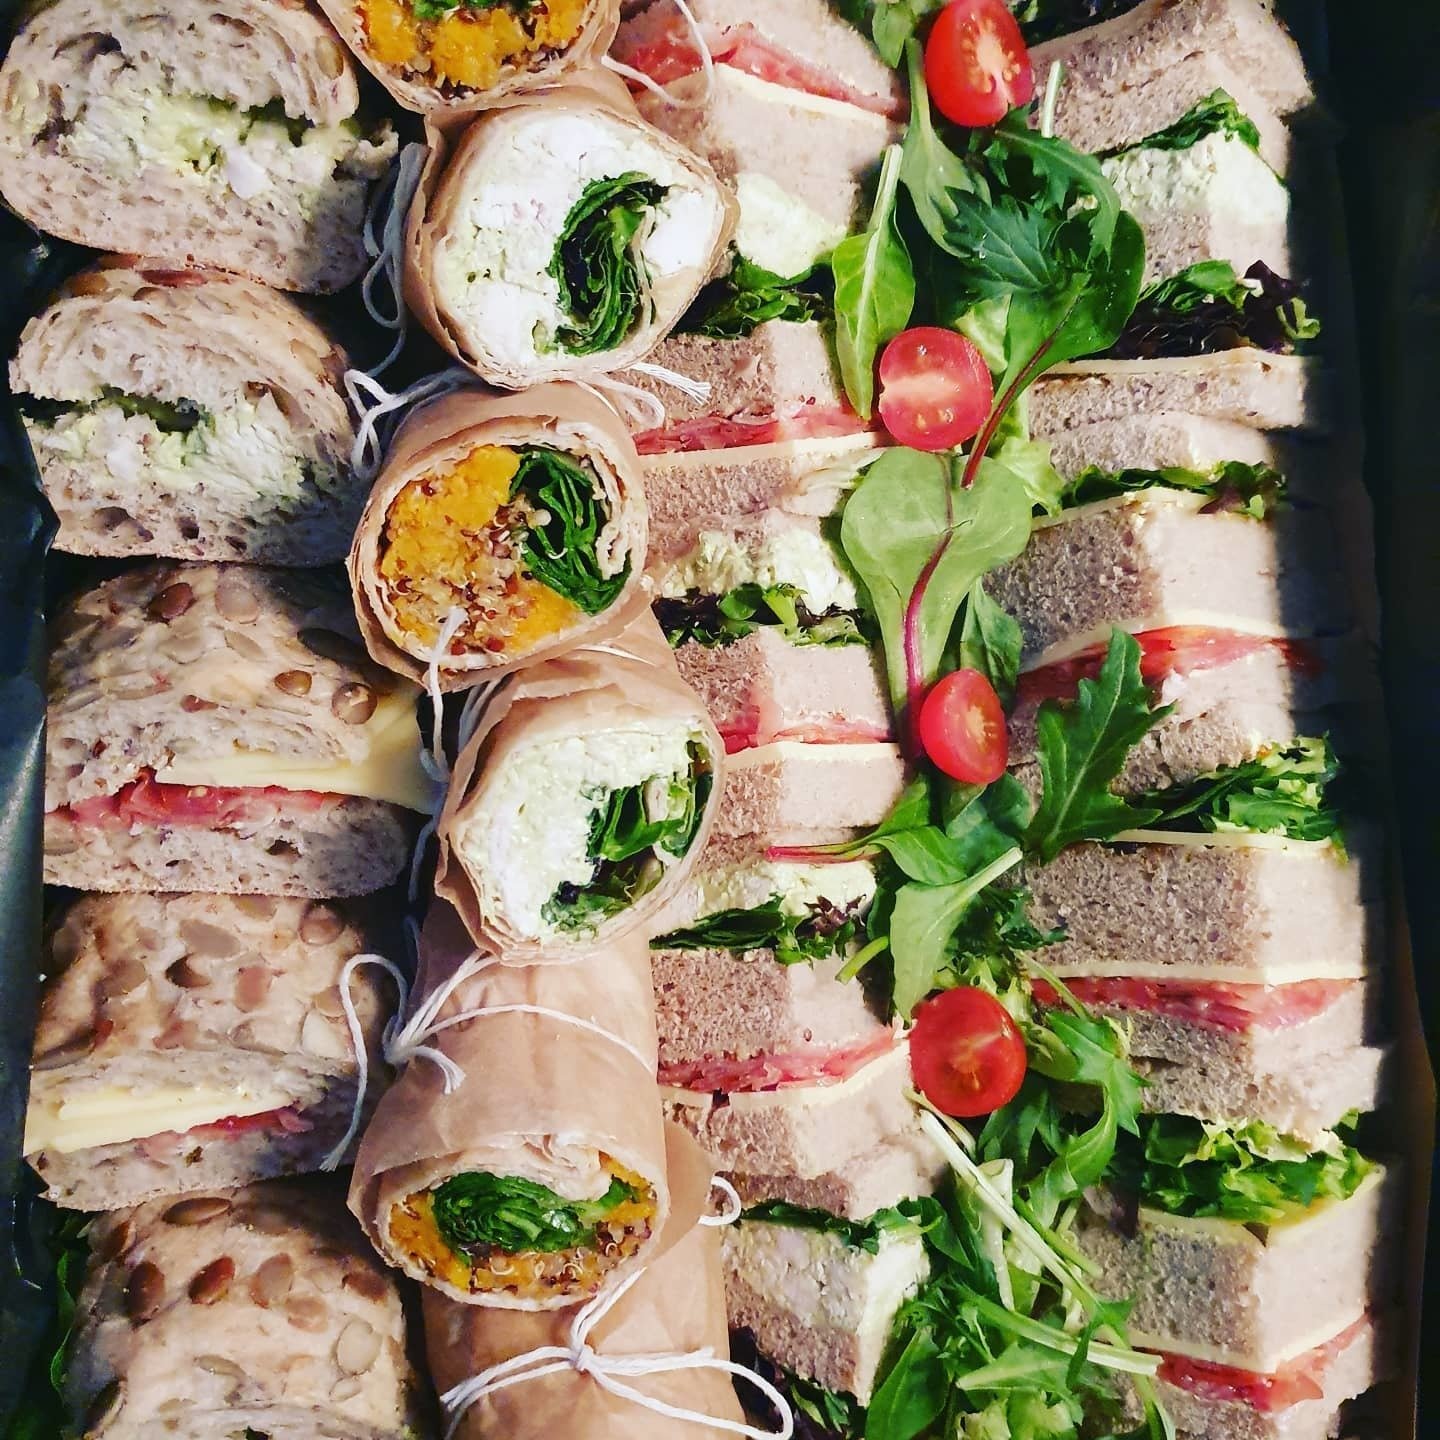 Sandwiches Wraps and Rolls